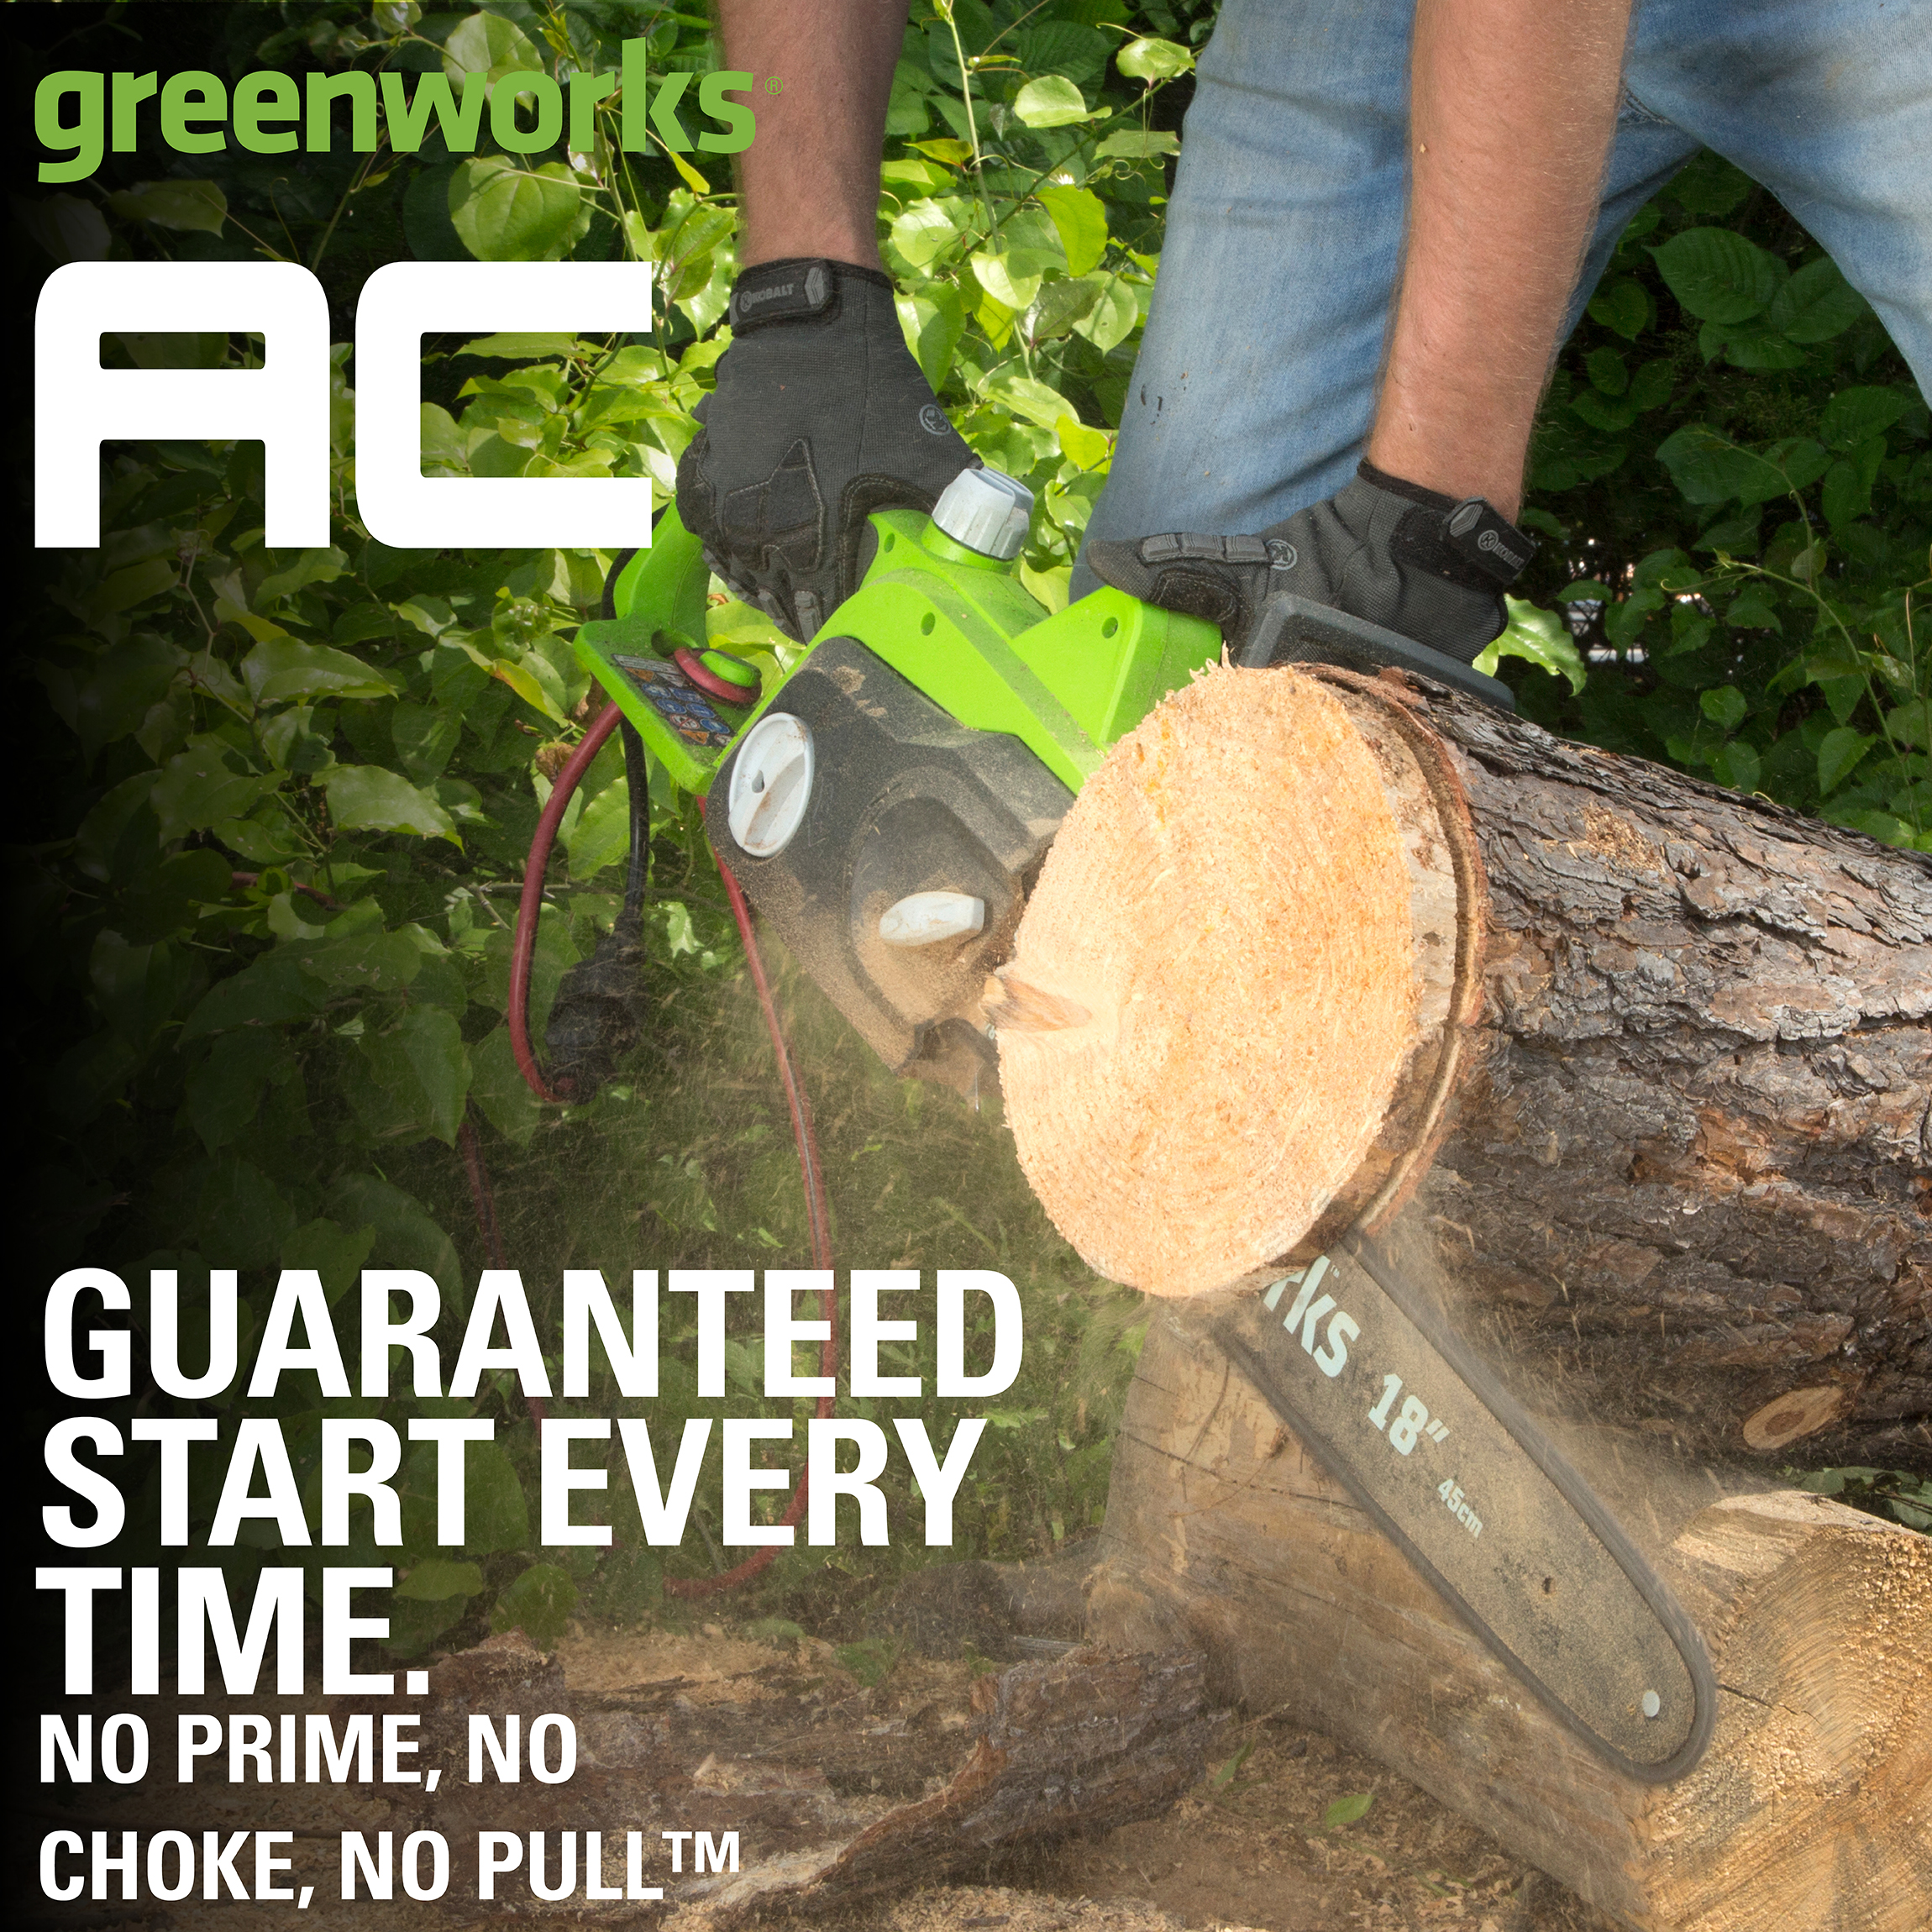 Greenworks 14.5 Amp 18" Corded Electric Chainsaw 20332 - image 5 of 14